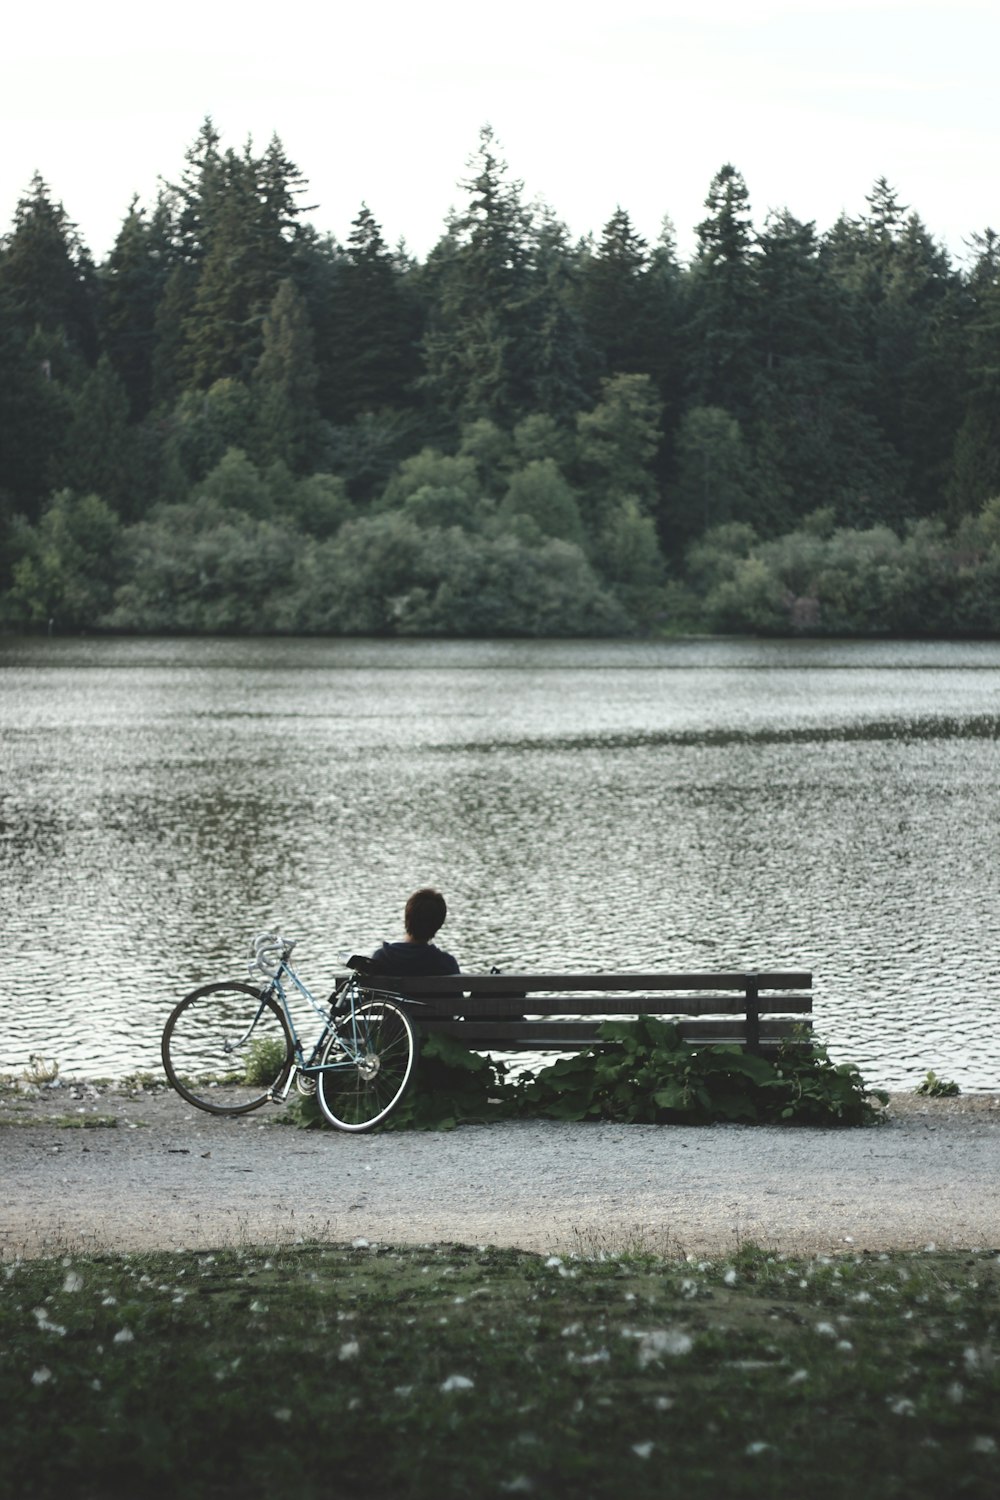 person sitting on bench near body of water during daytime